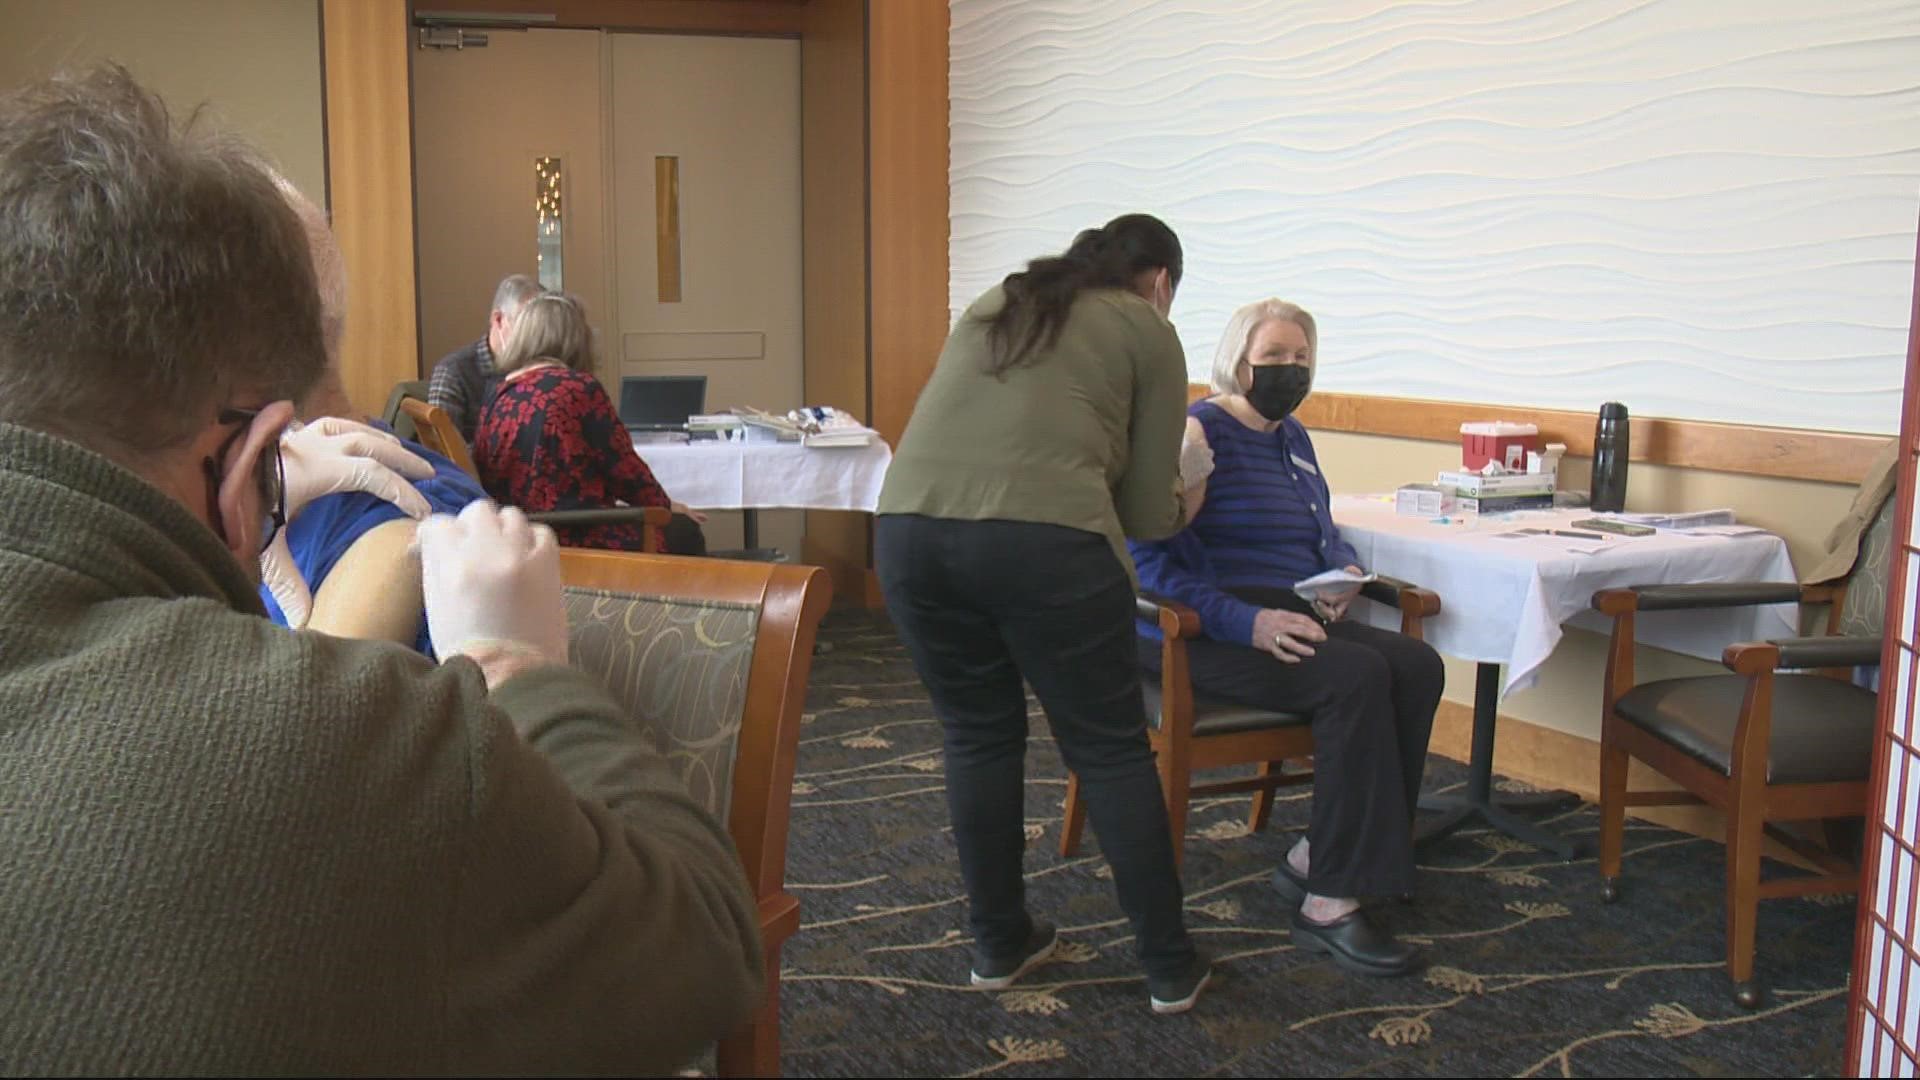 More Oregonians are getting booster COVID-19 shots than first and second doses combined. KGW's Tim Gordon reports.